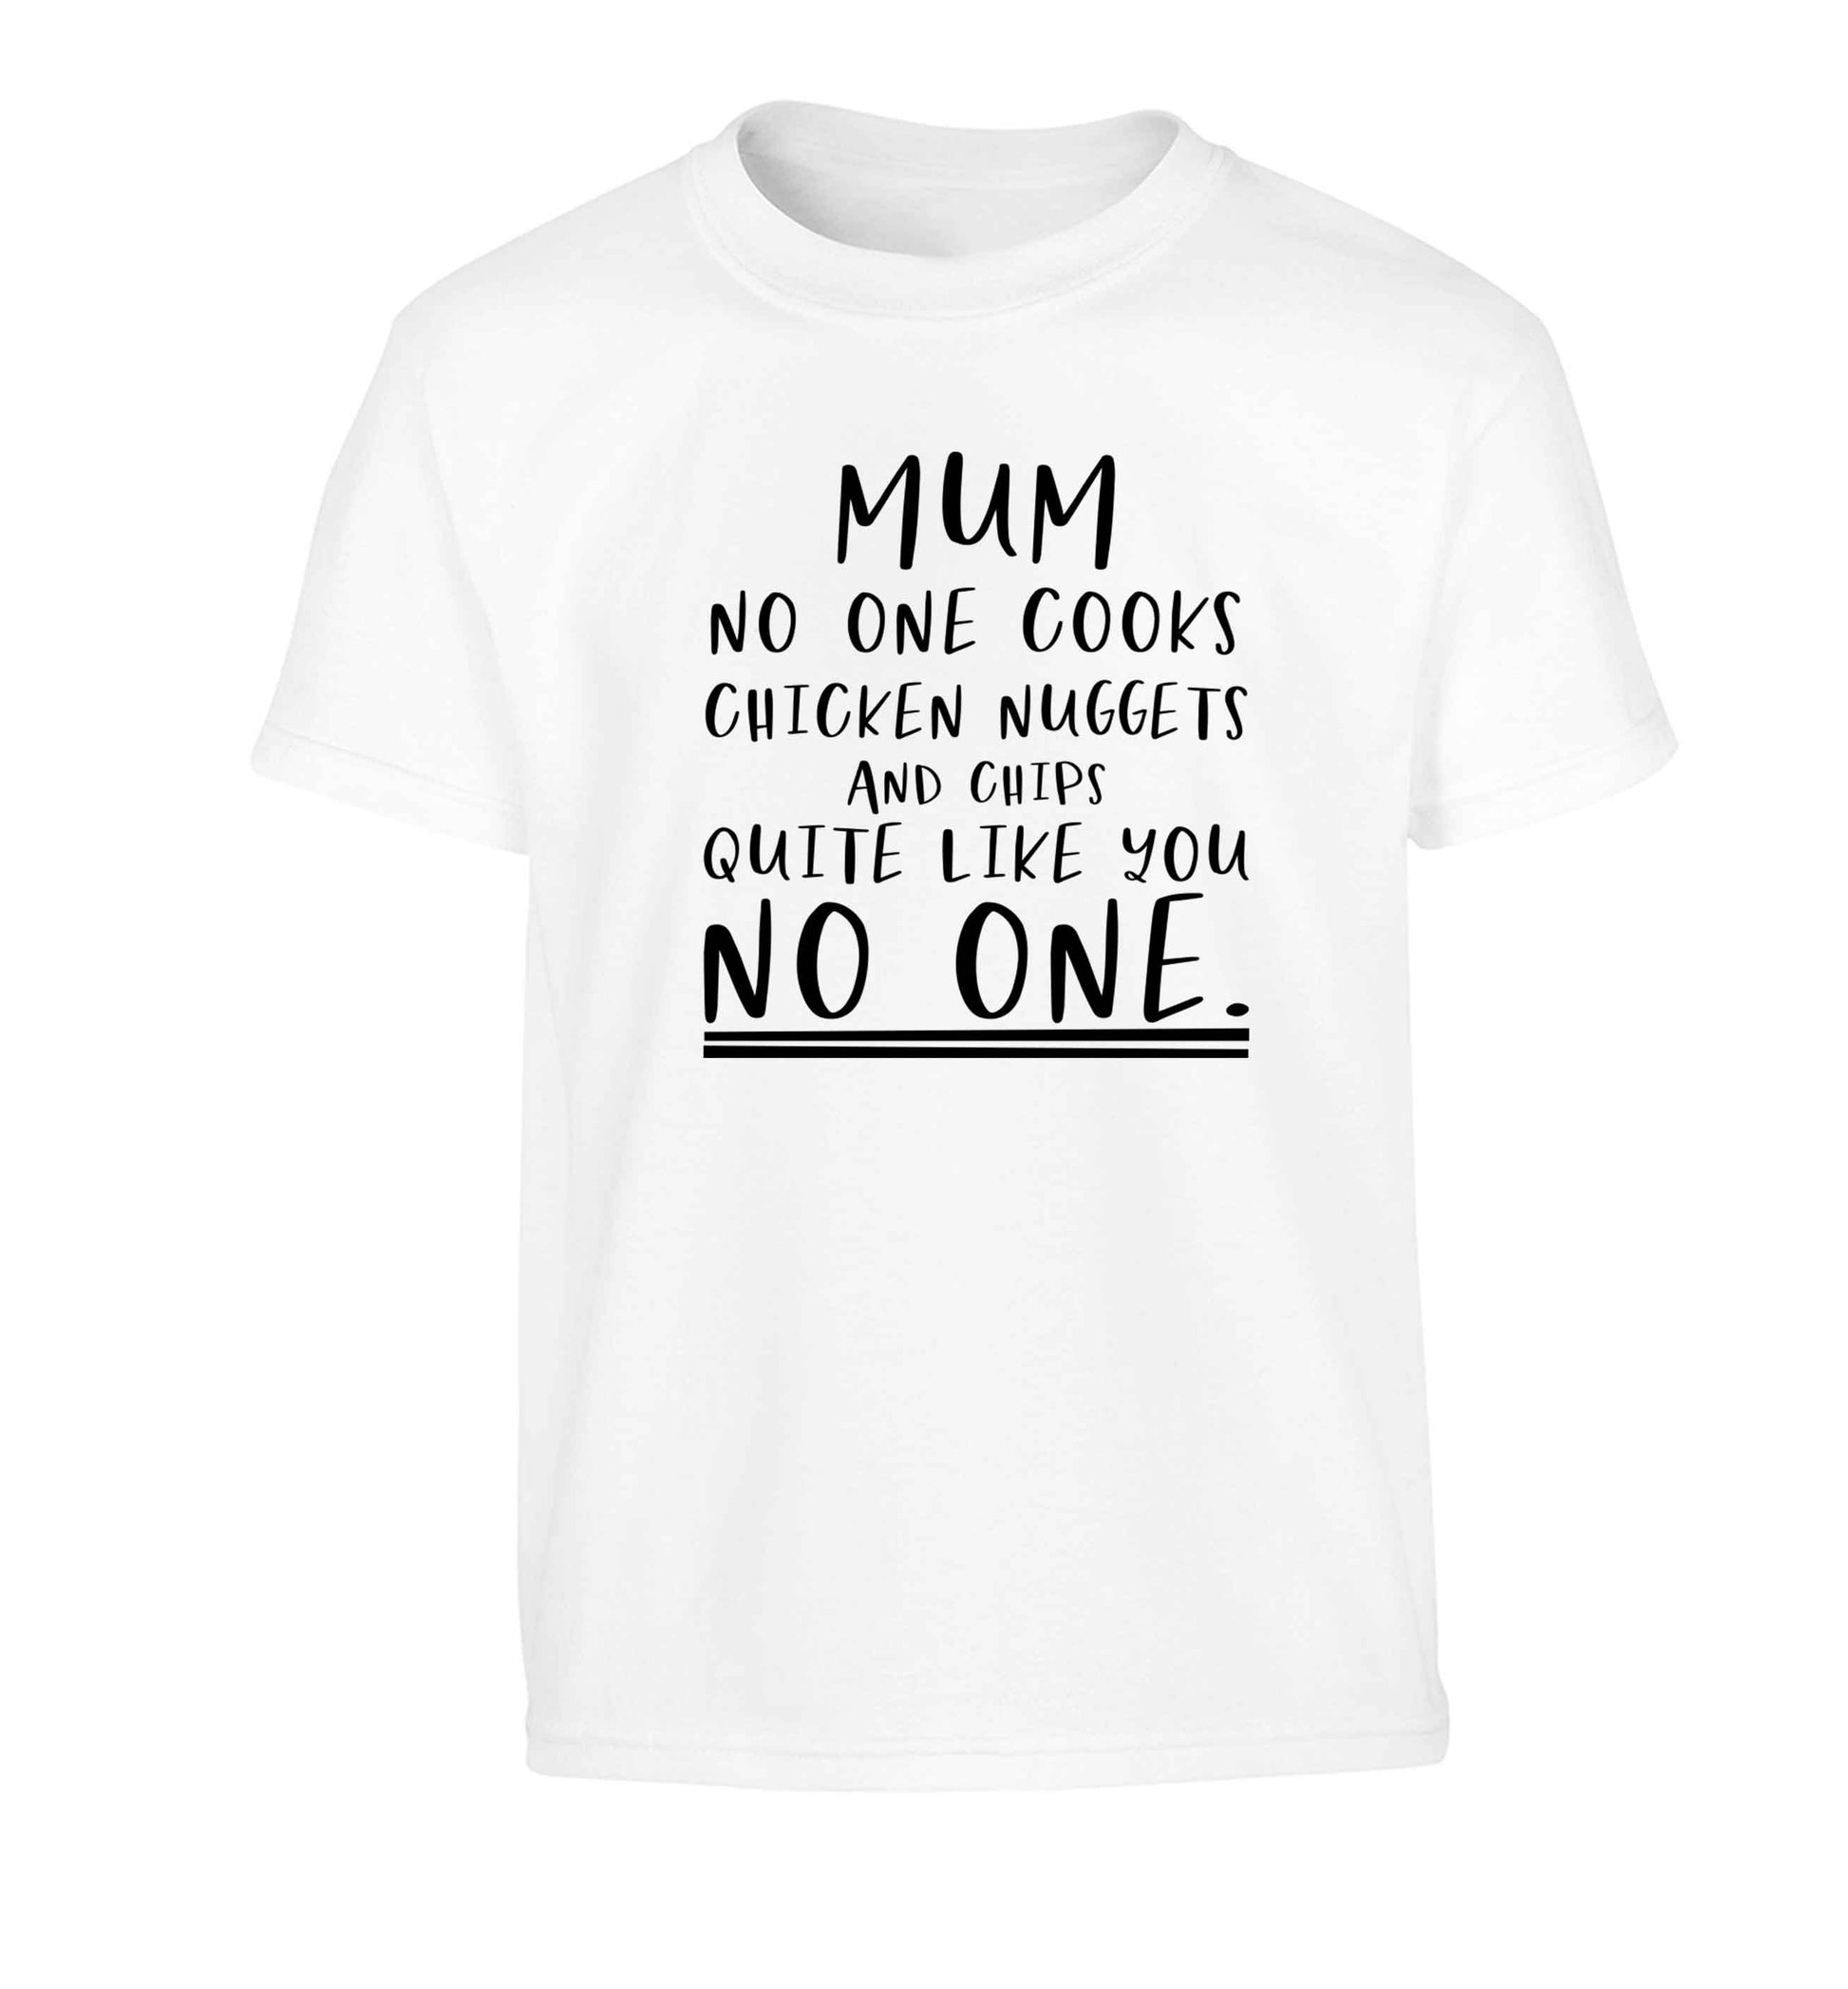 Super funny sassy gift for mother's day or birthday!  Mum no one cooks chicken nuggets and chips like you no one Children's white Tshirt 12-13 Years